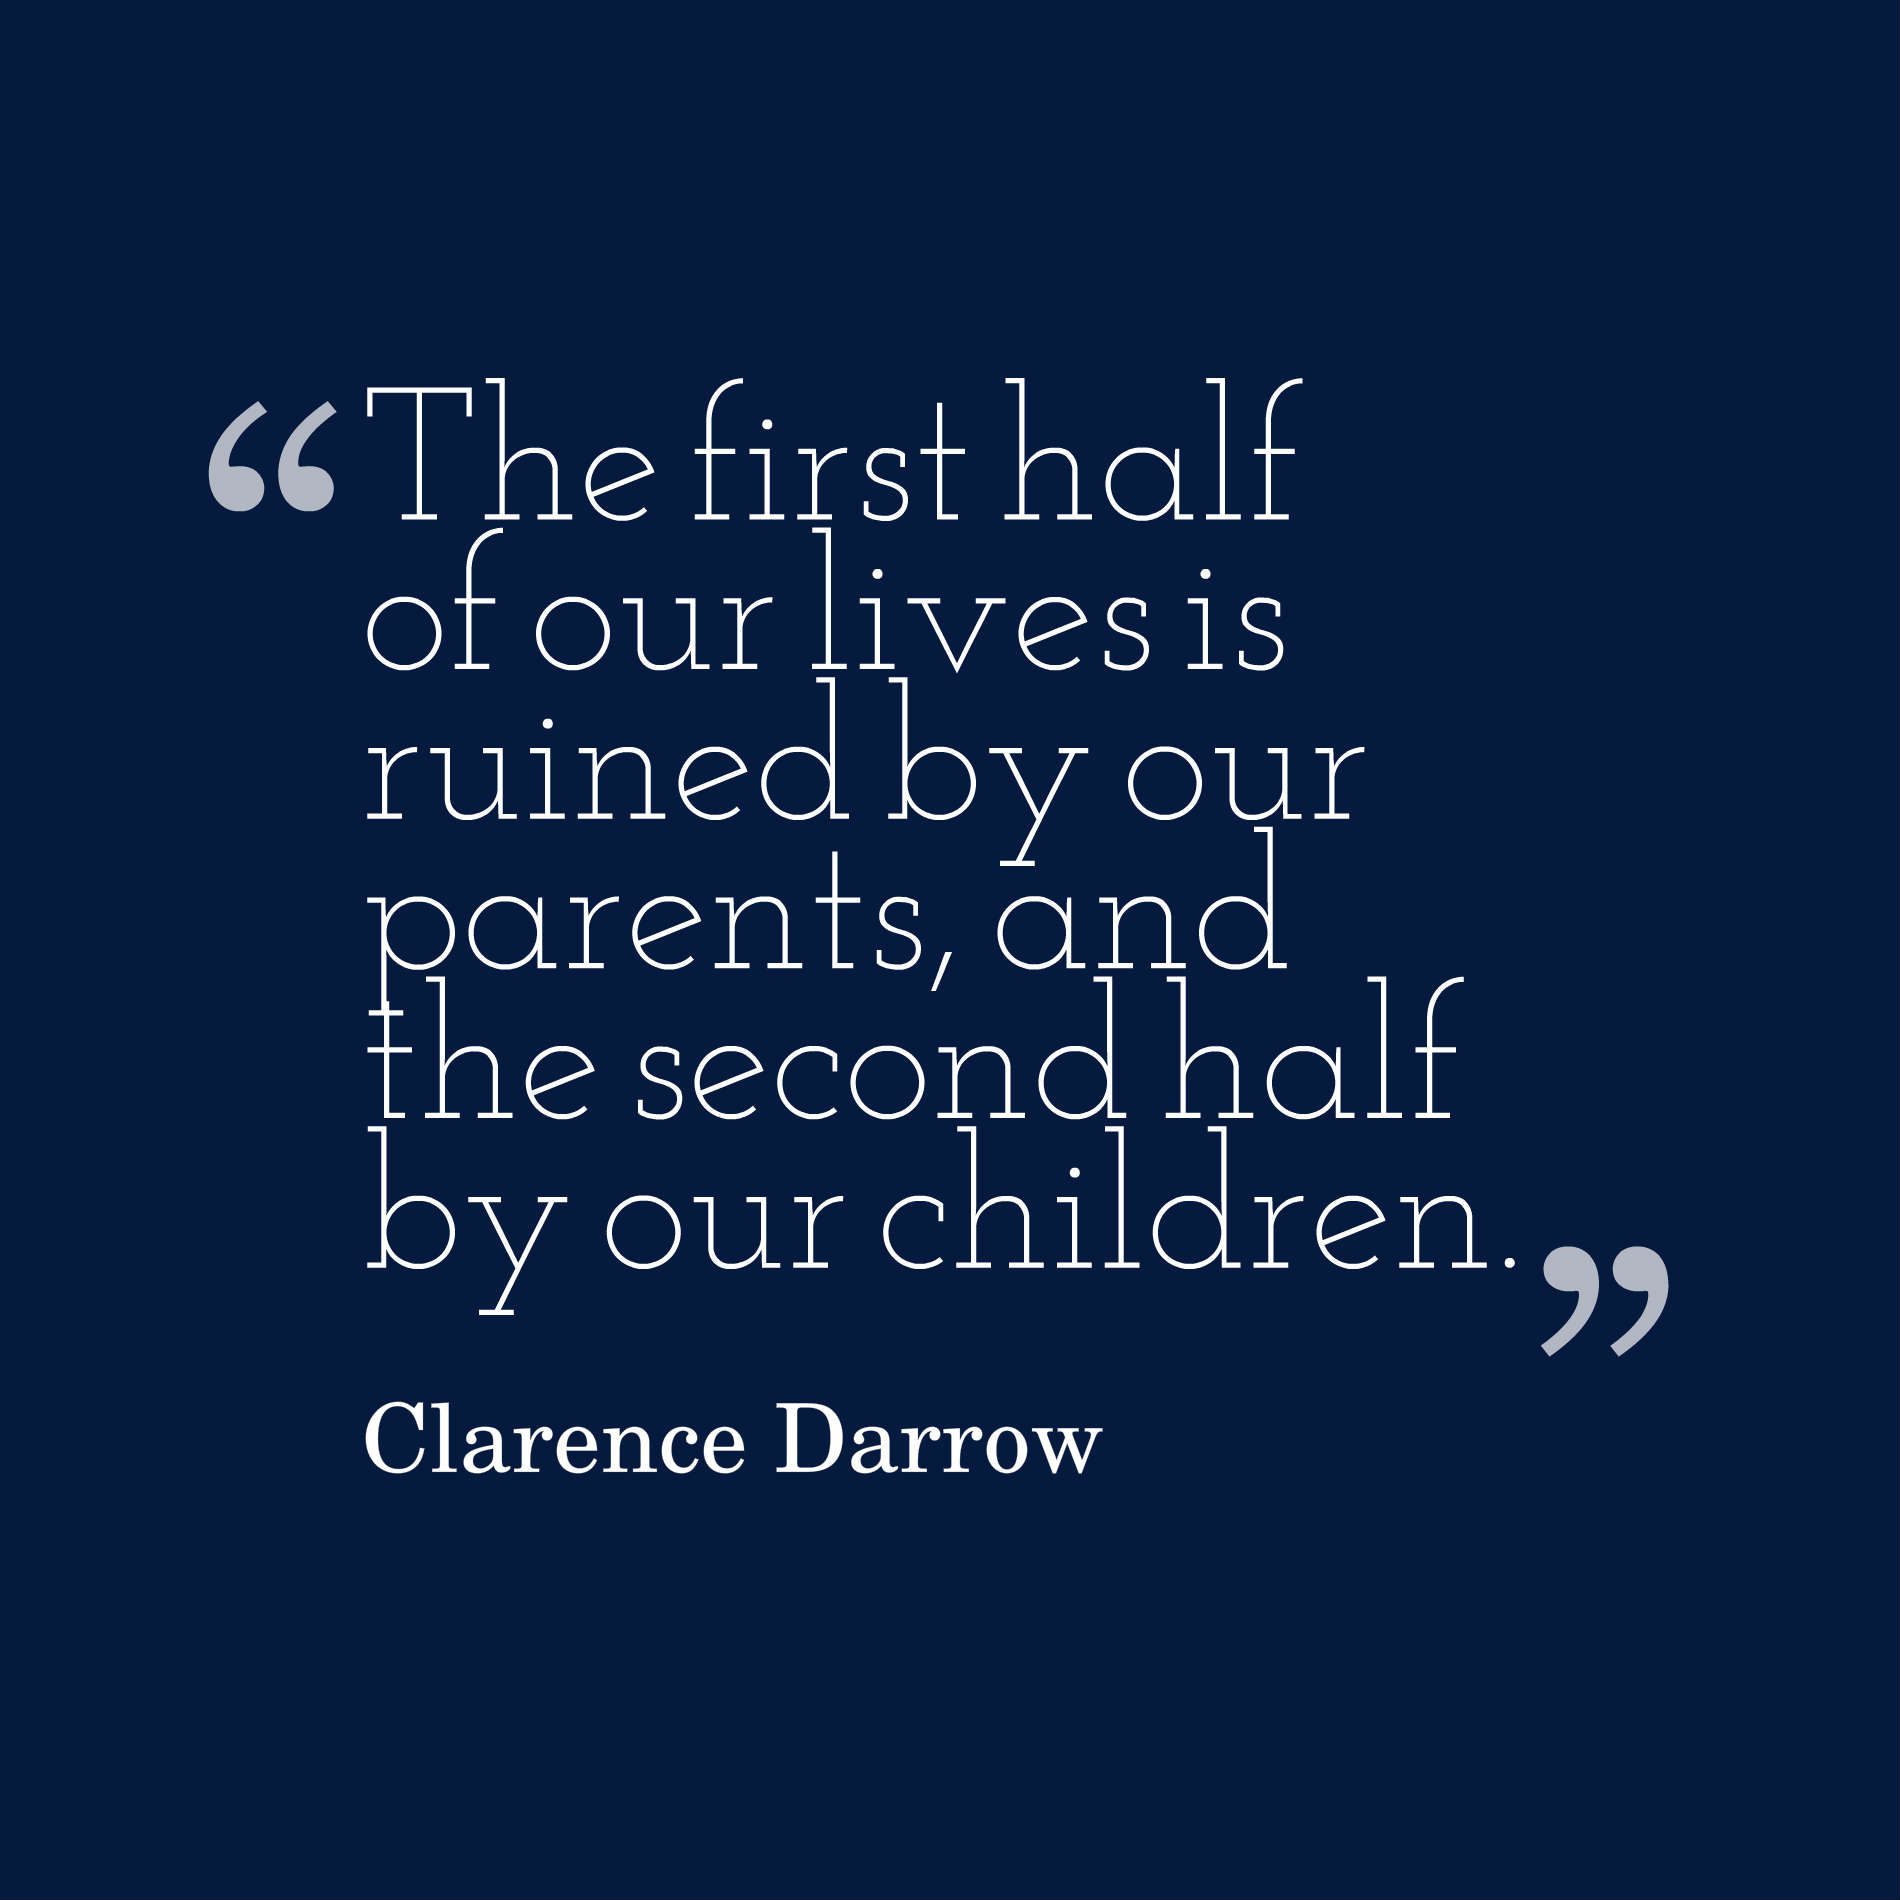 The first half of our lives is ruined by our parents, and the second half by our children.